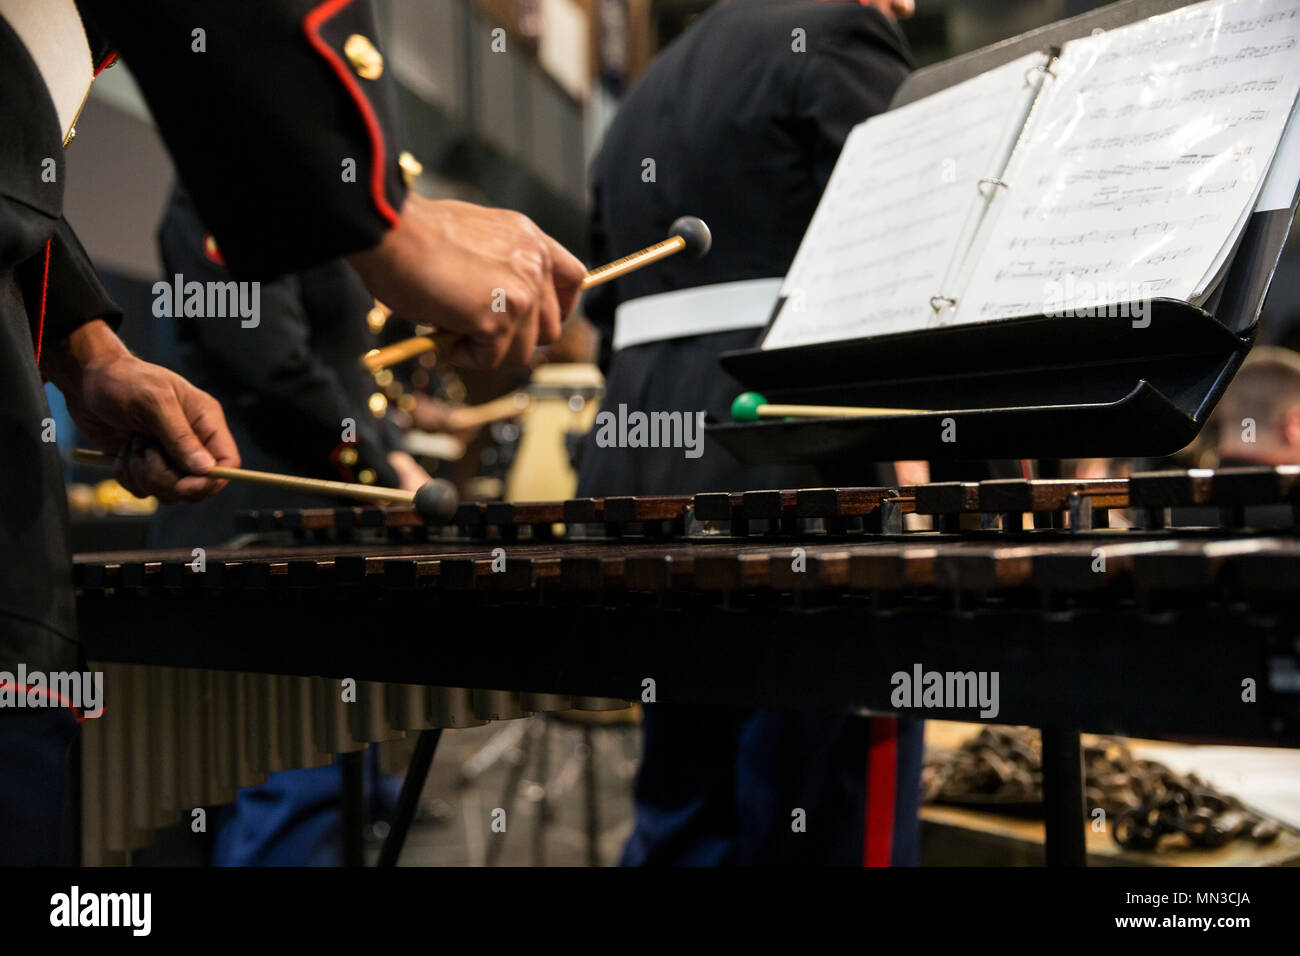 U.S. Marines with the Quantico Marine Band perform for a concert held at Roanoke College, Salem, Va. Aug. 28, 2017. The concert was part of a free annual summer concert series. (U.S. Marine Corps photo by Lance Cpl. Cristian L. Ricardo) Stock Photo